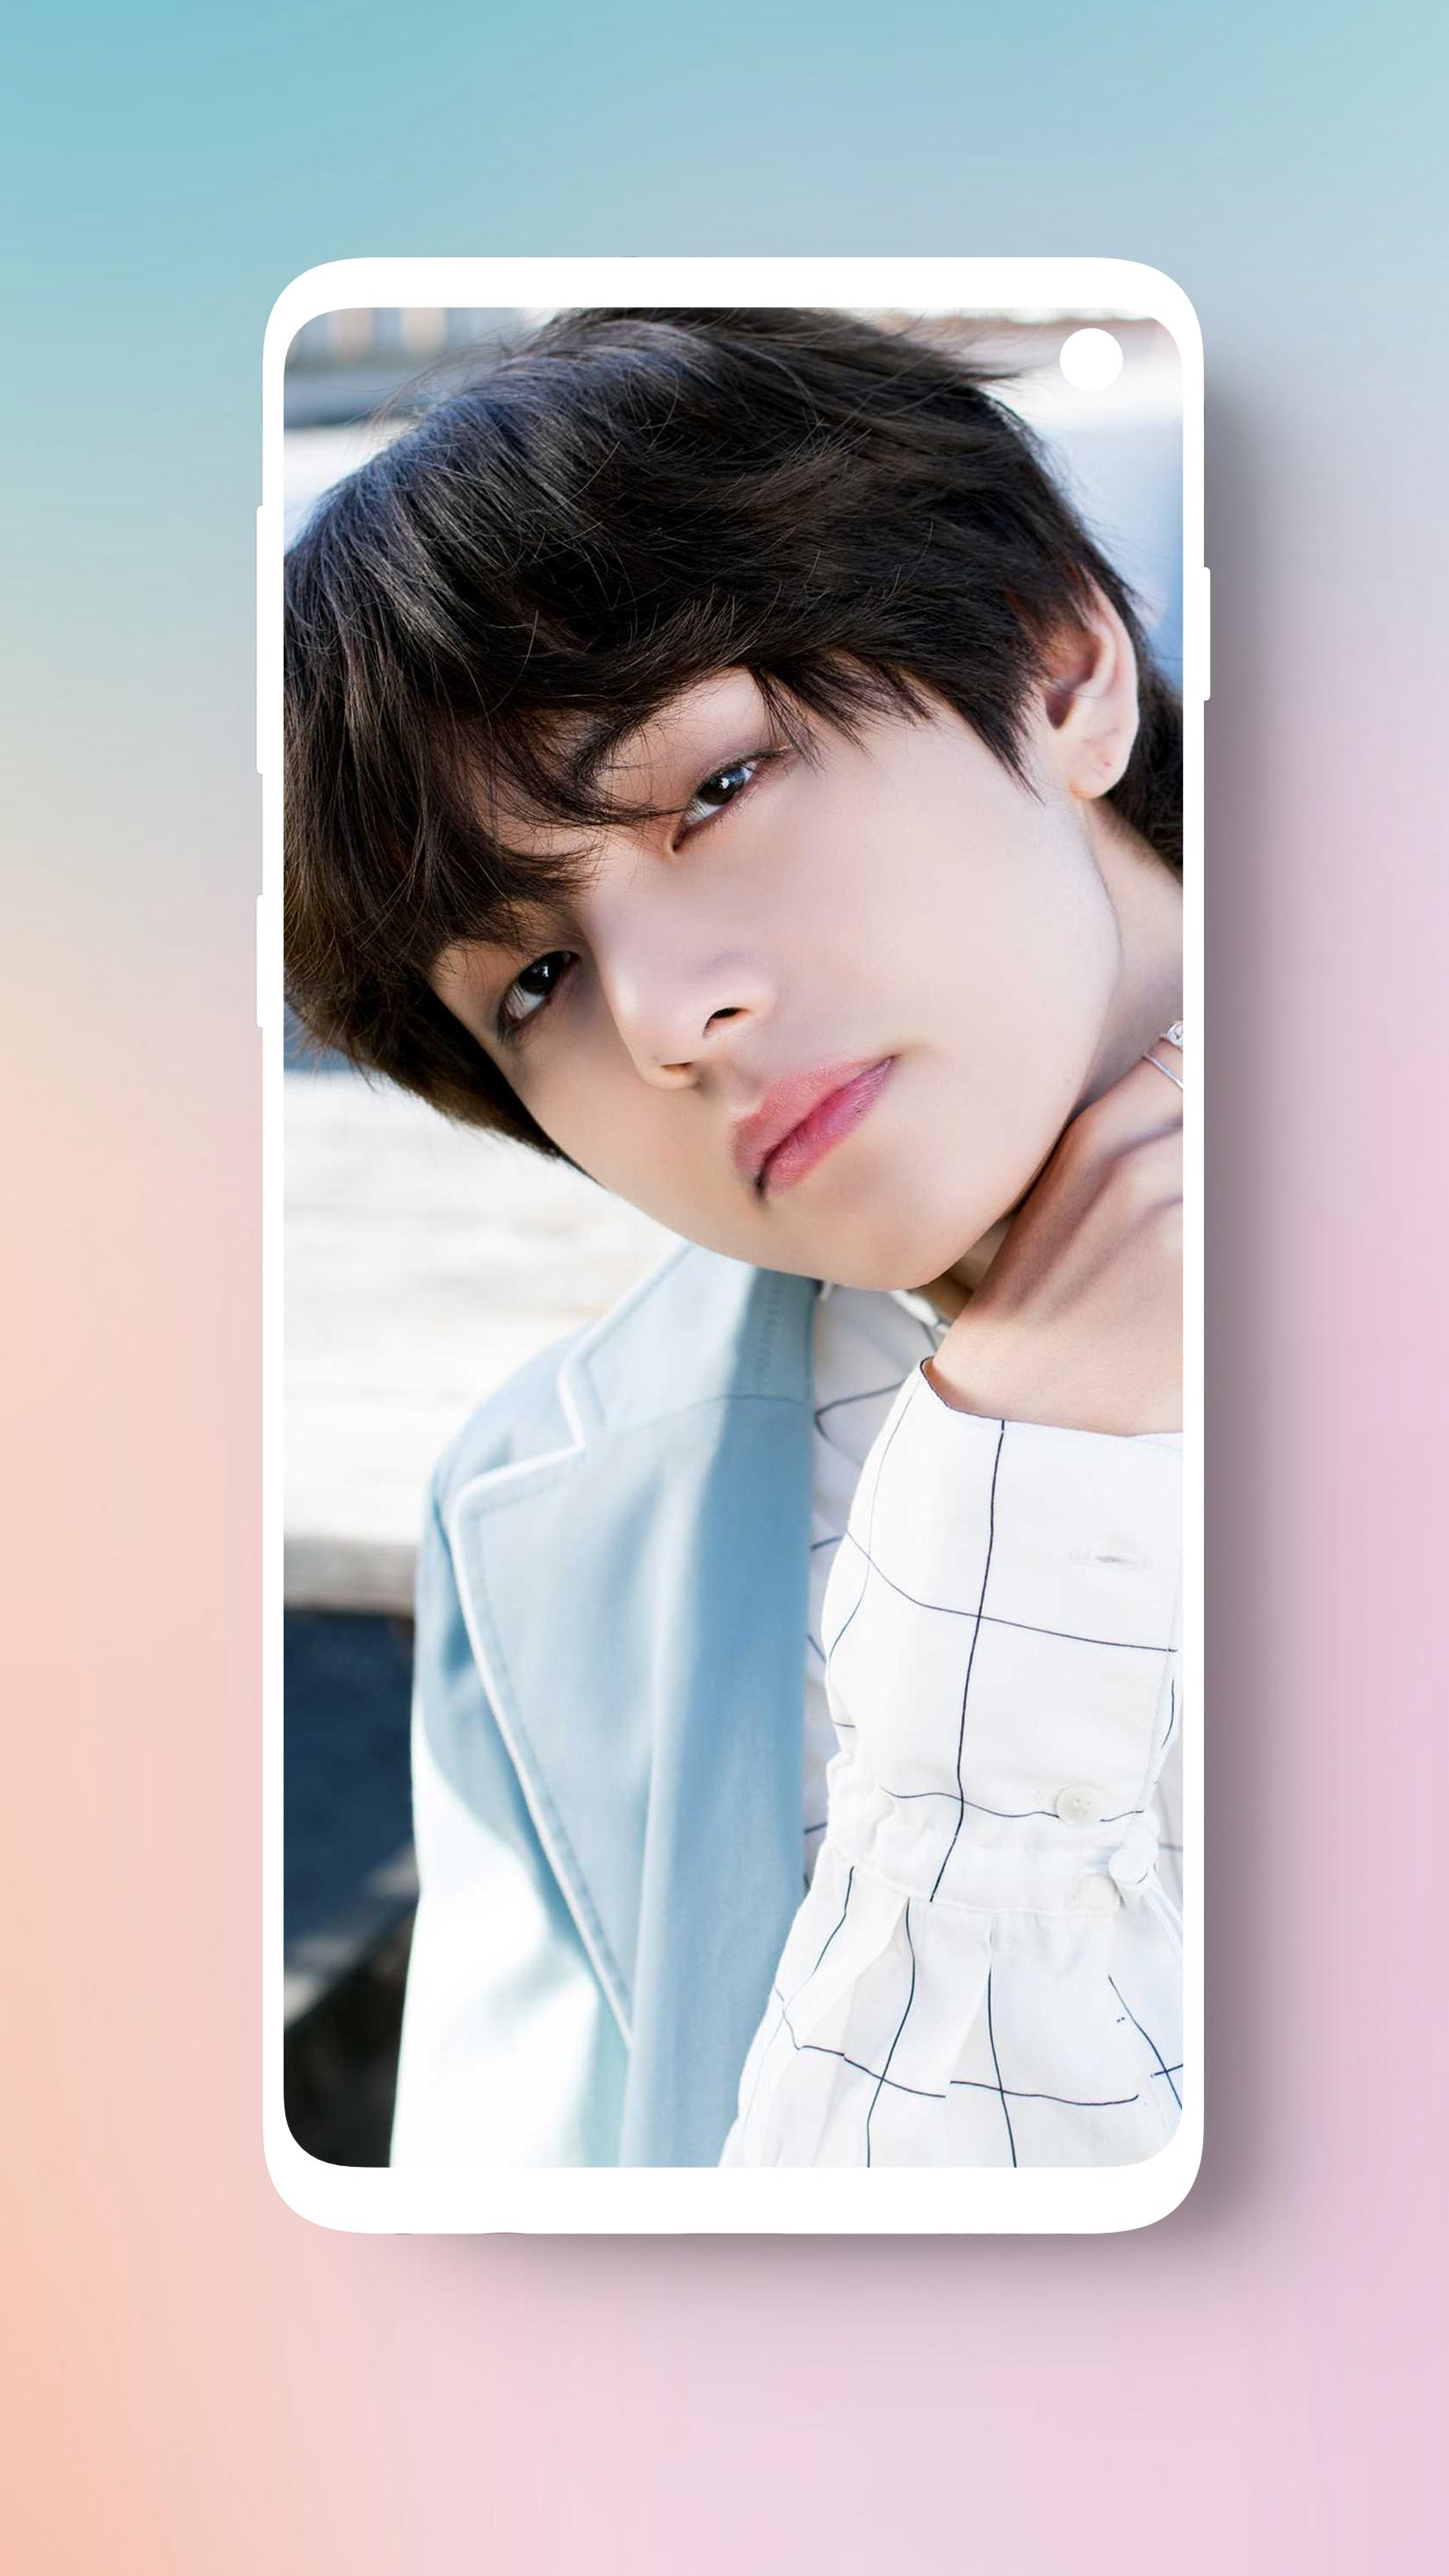 Bts Wallpaper Hd Photos 2020 For Android Apk Download